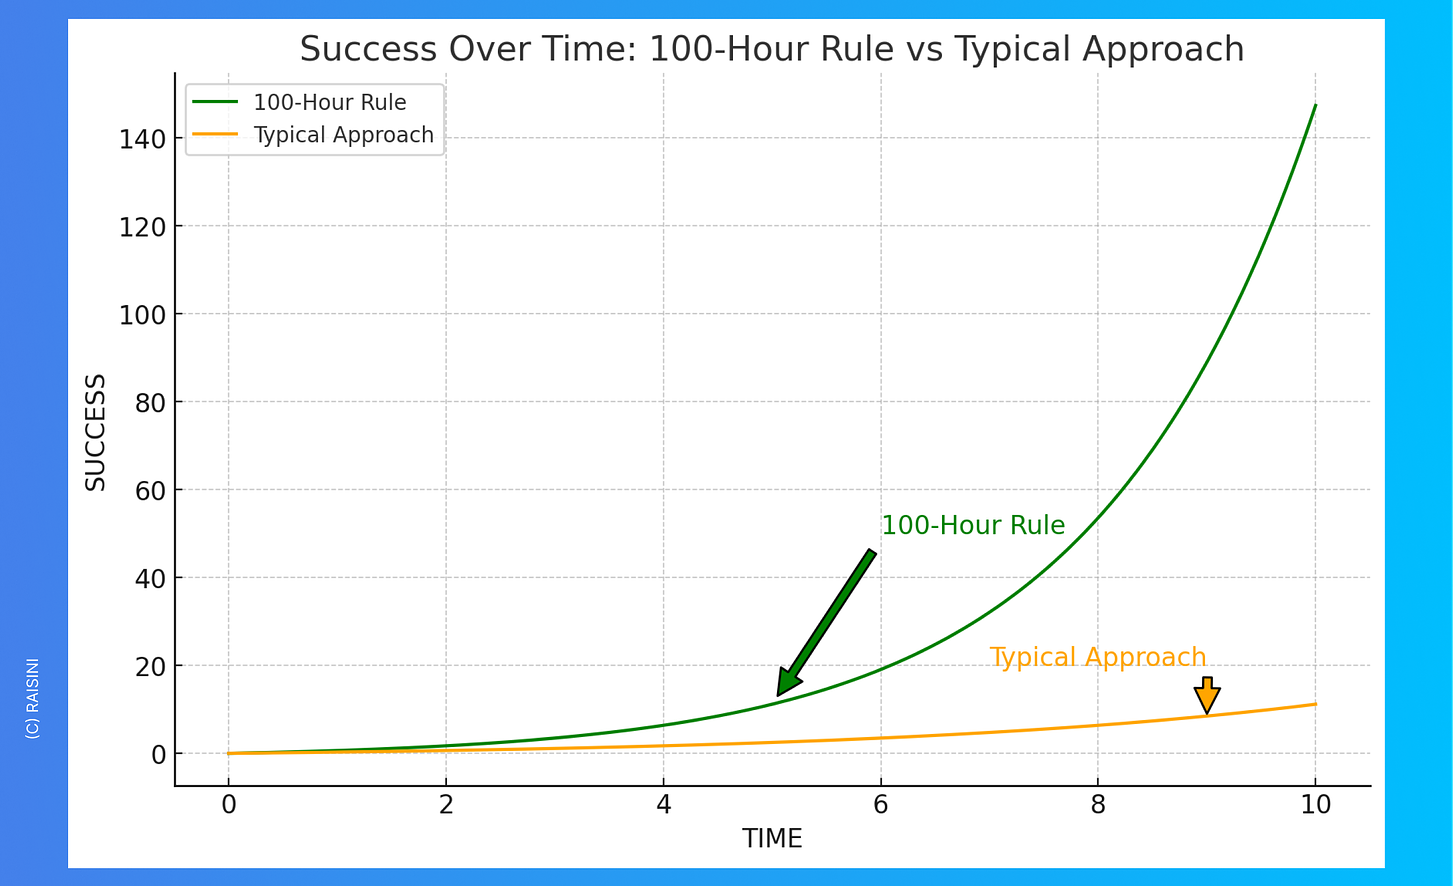 Success over time: 100-Hour Rule vs Typical approach